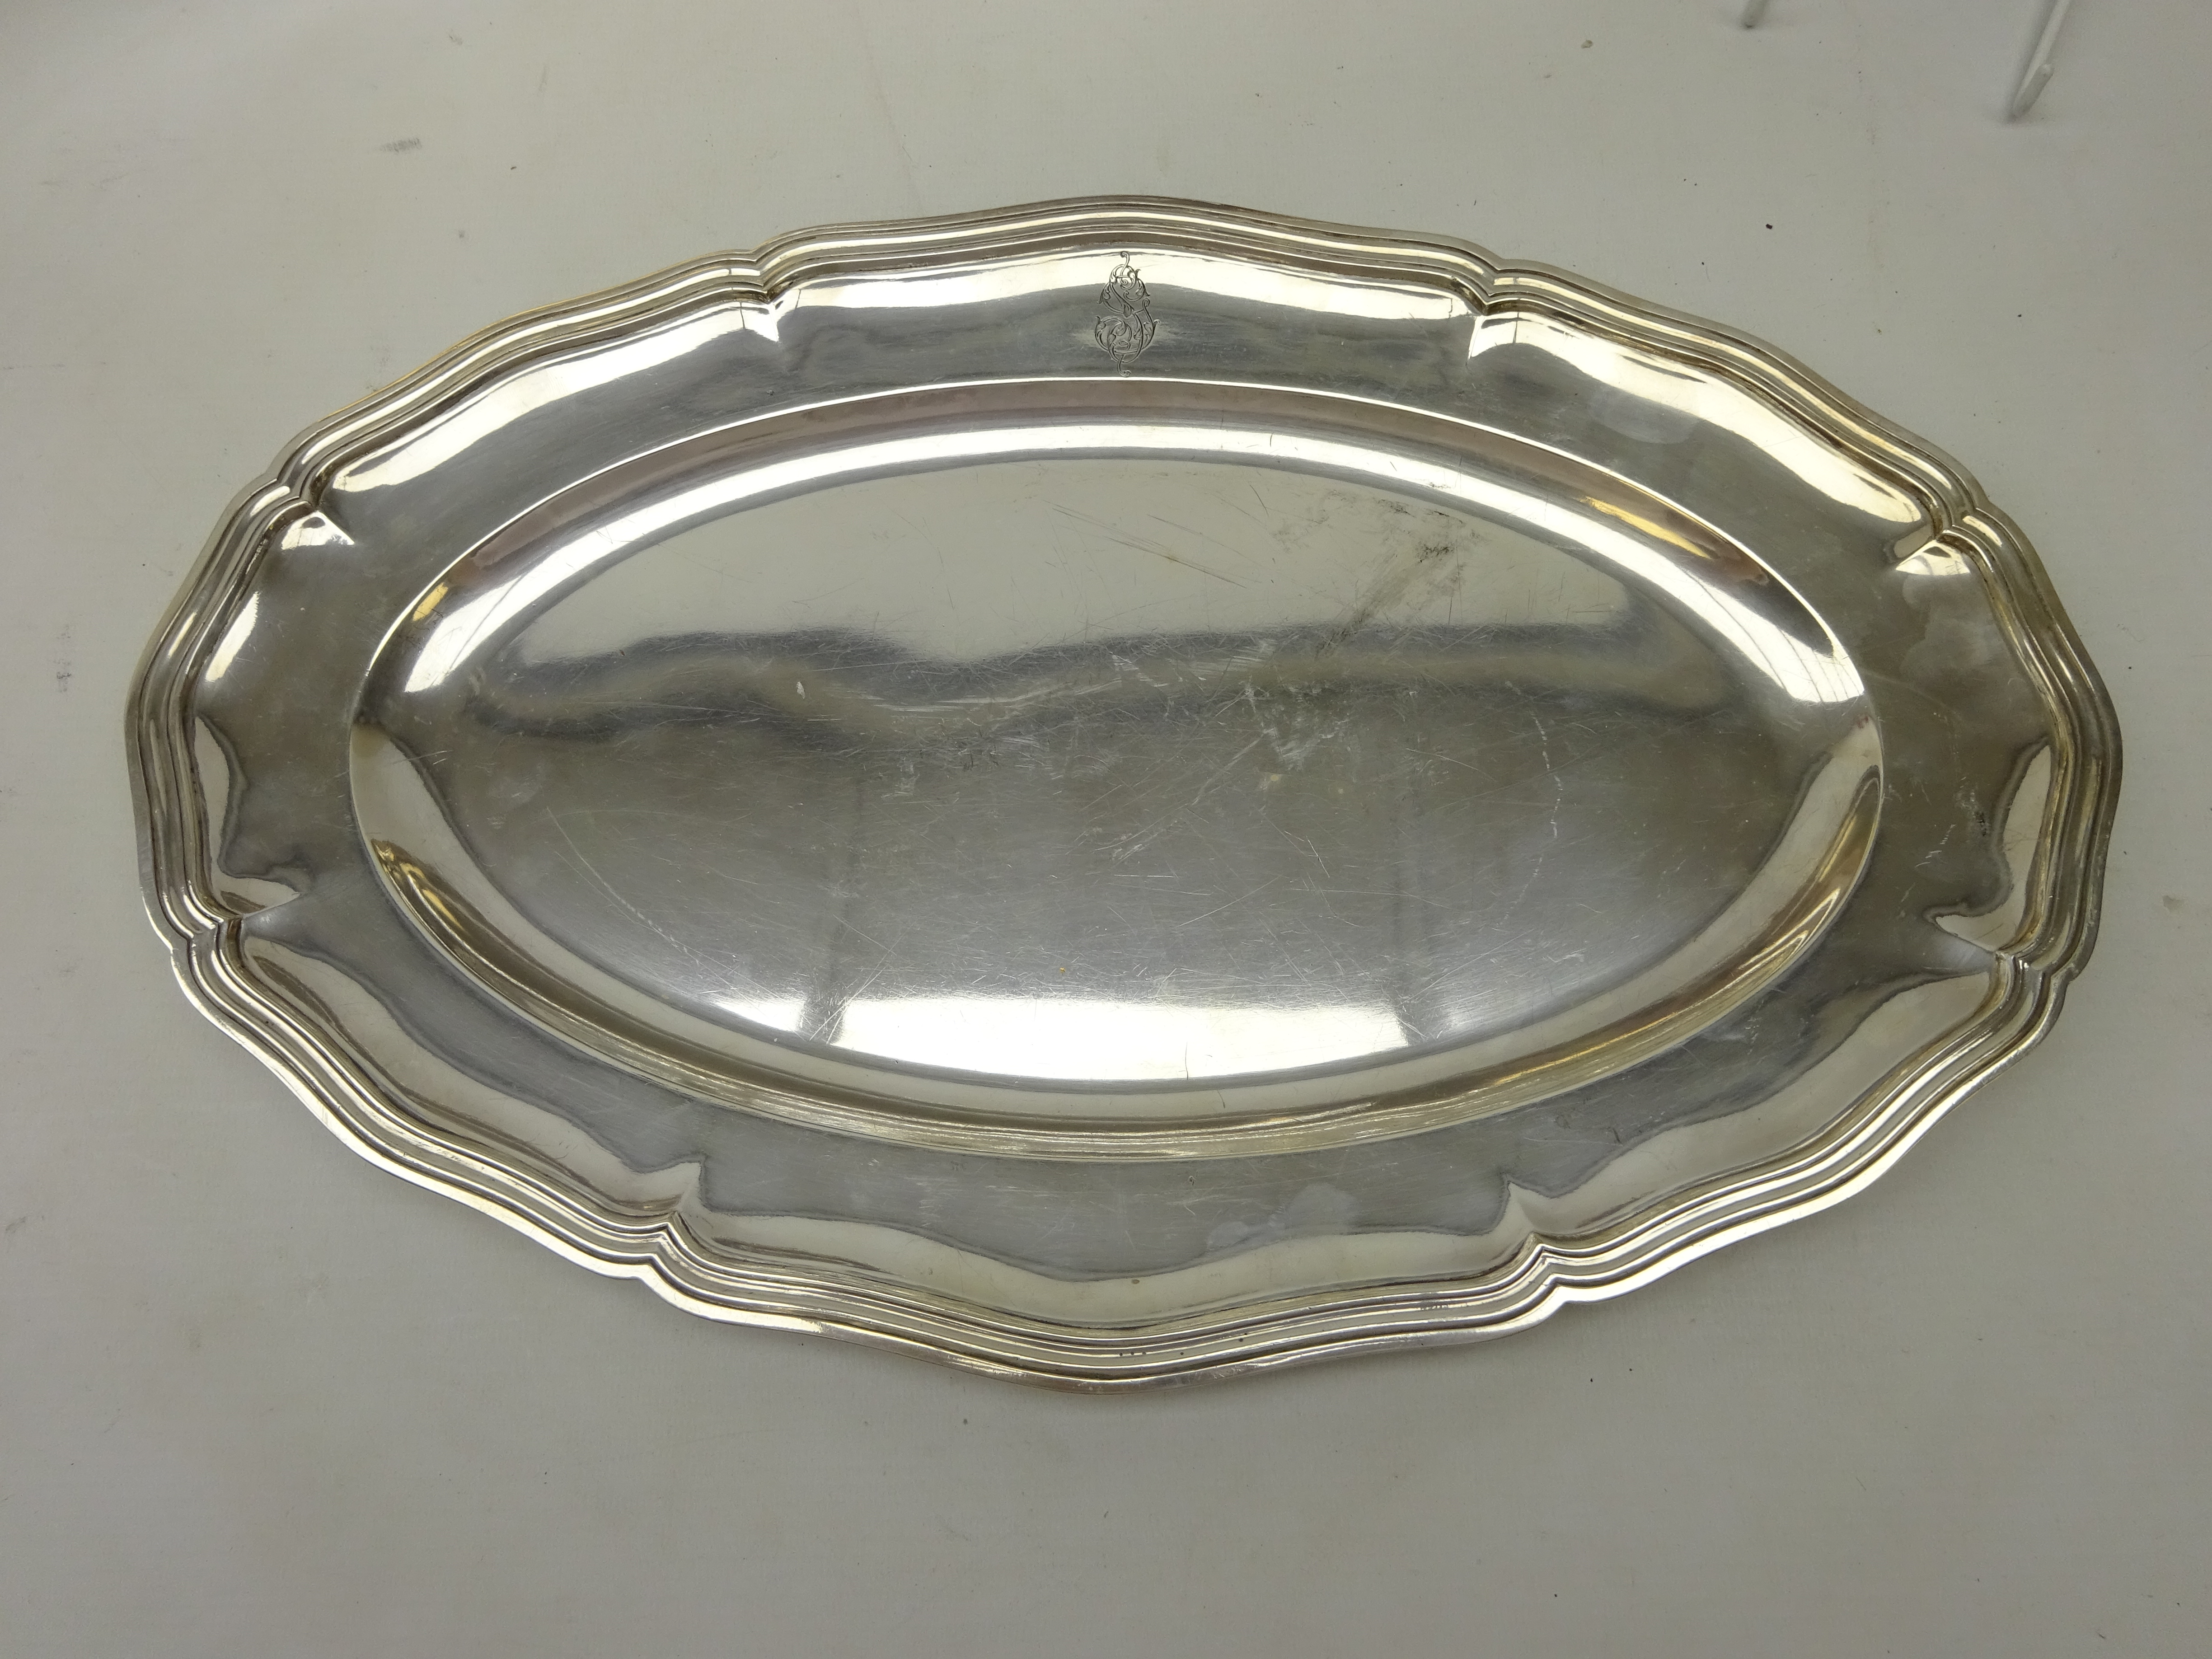 Late 19th century Christofle silver-plated tureen and cover with scalloped edge, - Image 5 of 18